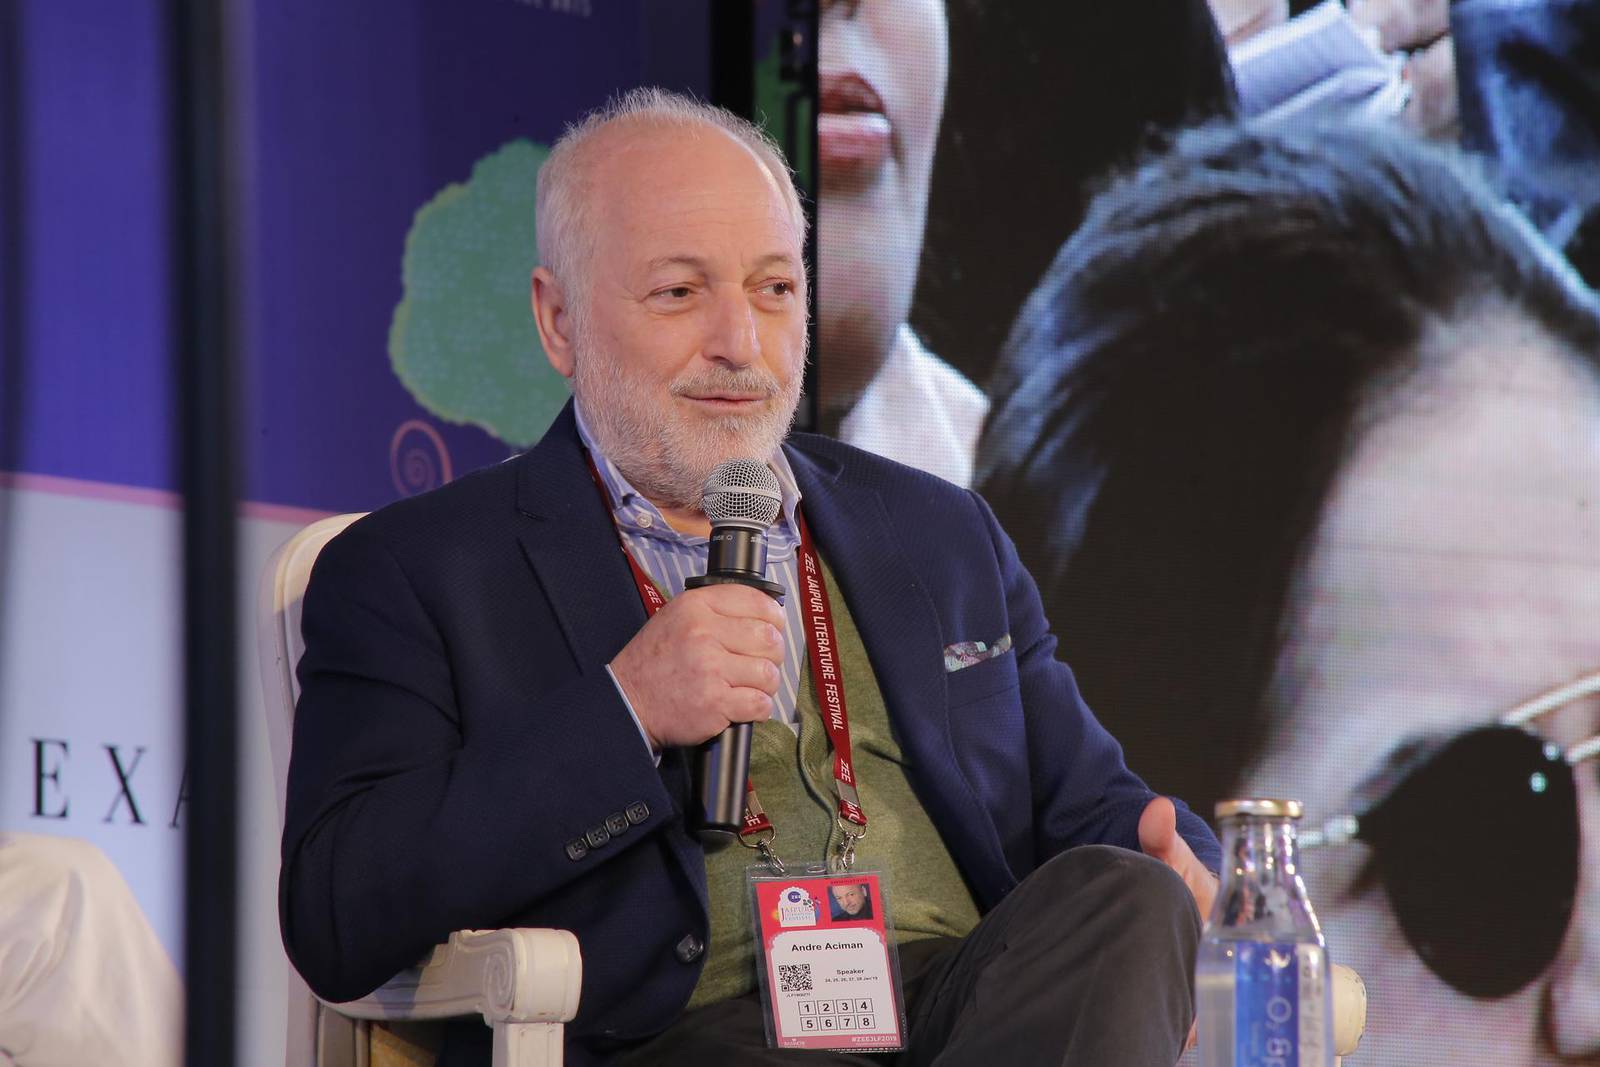 Author Andre Aciman says ending of 'Call Me By Your Name' was